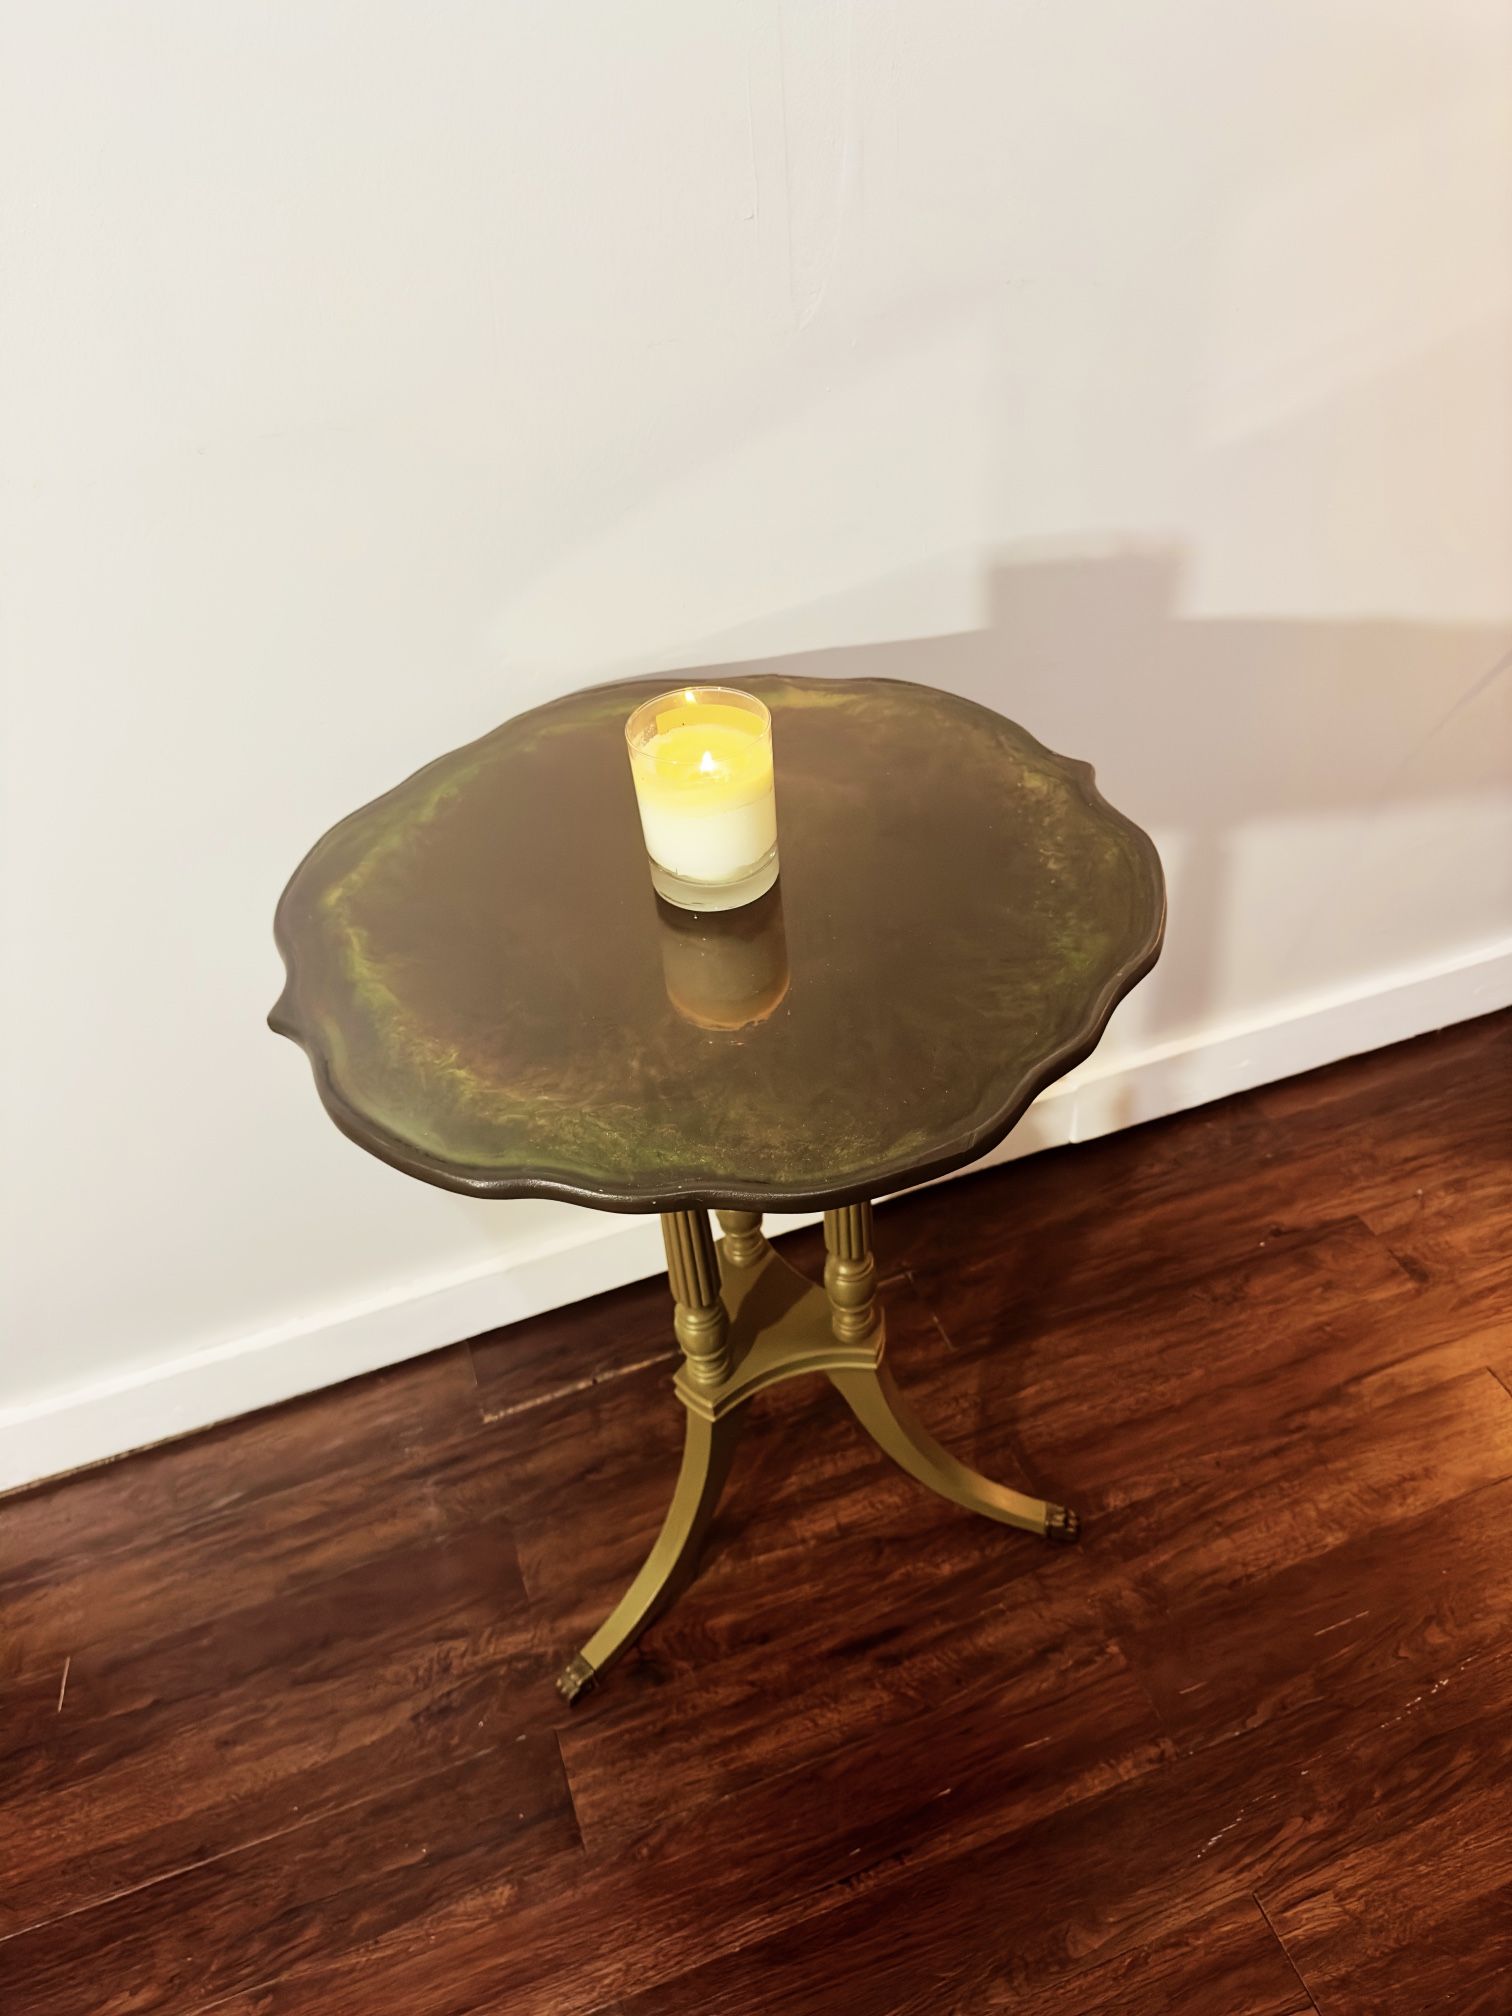 End Table / Plant Stand